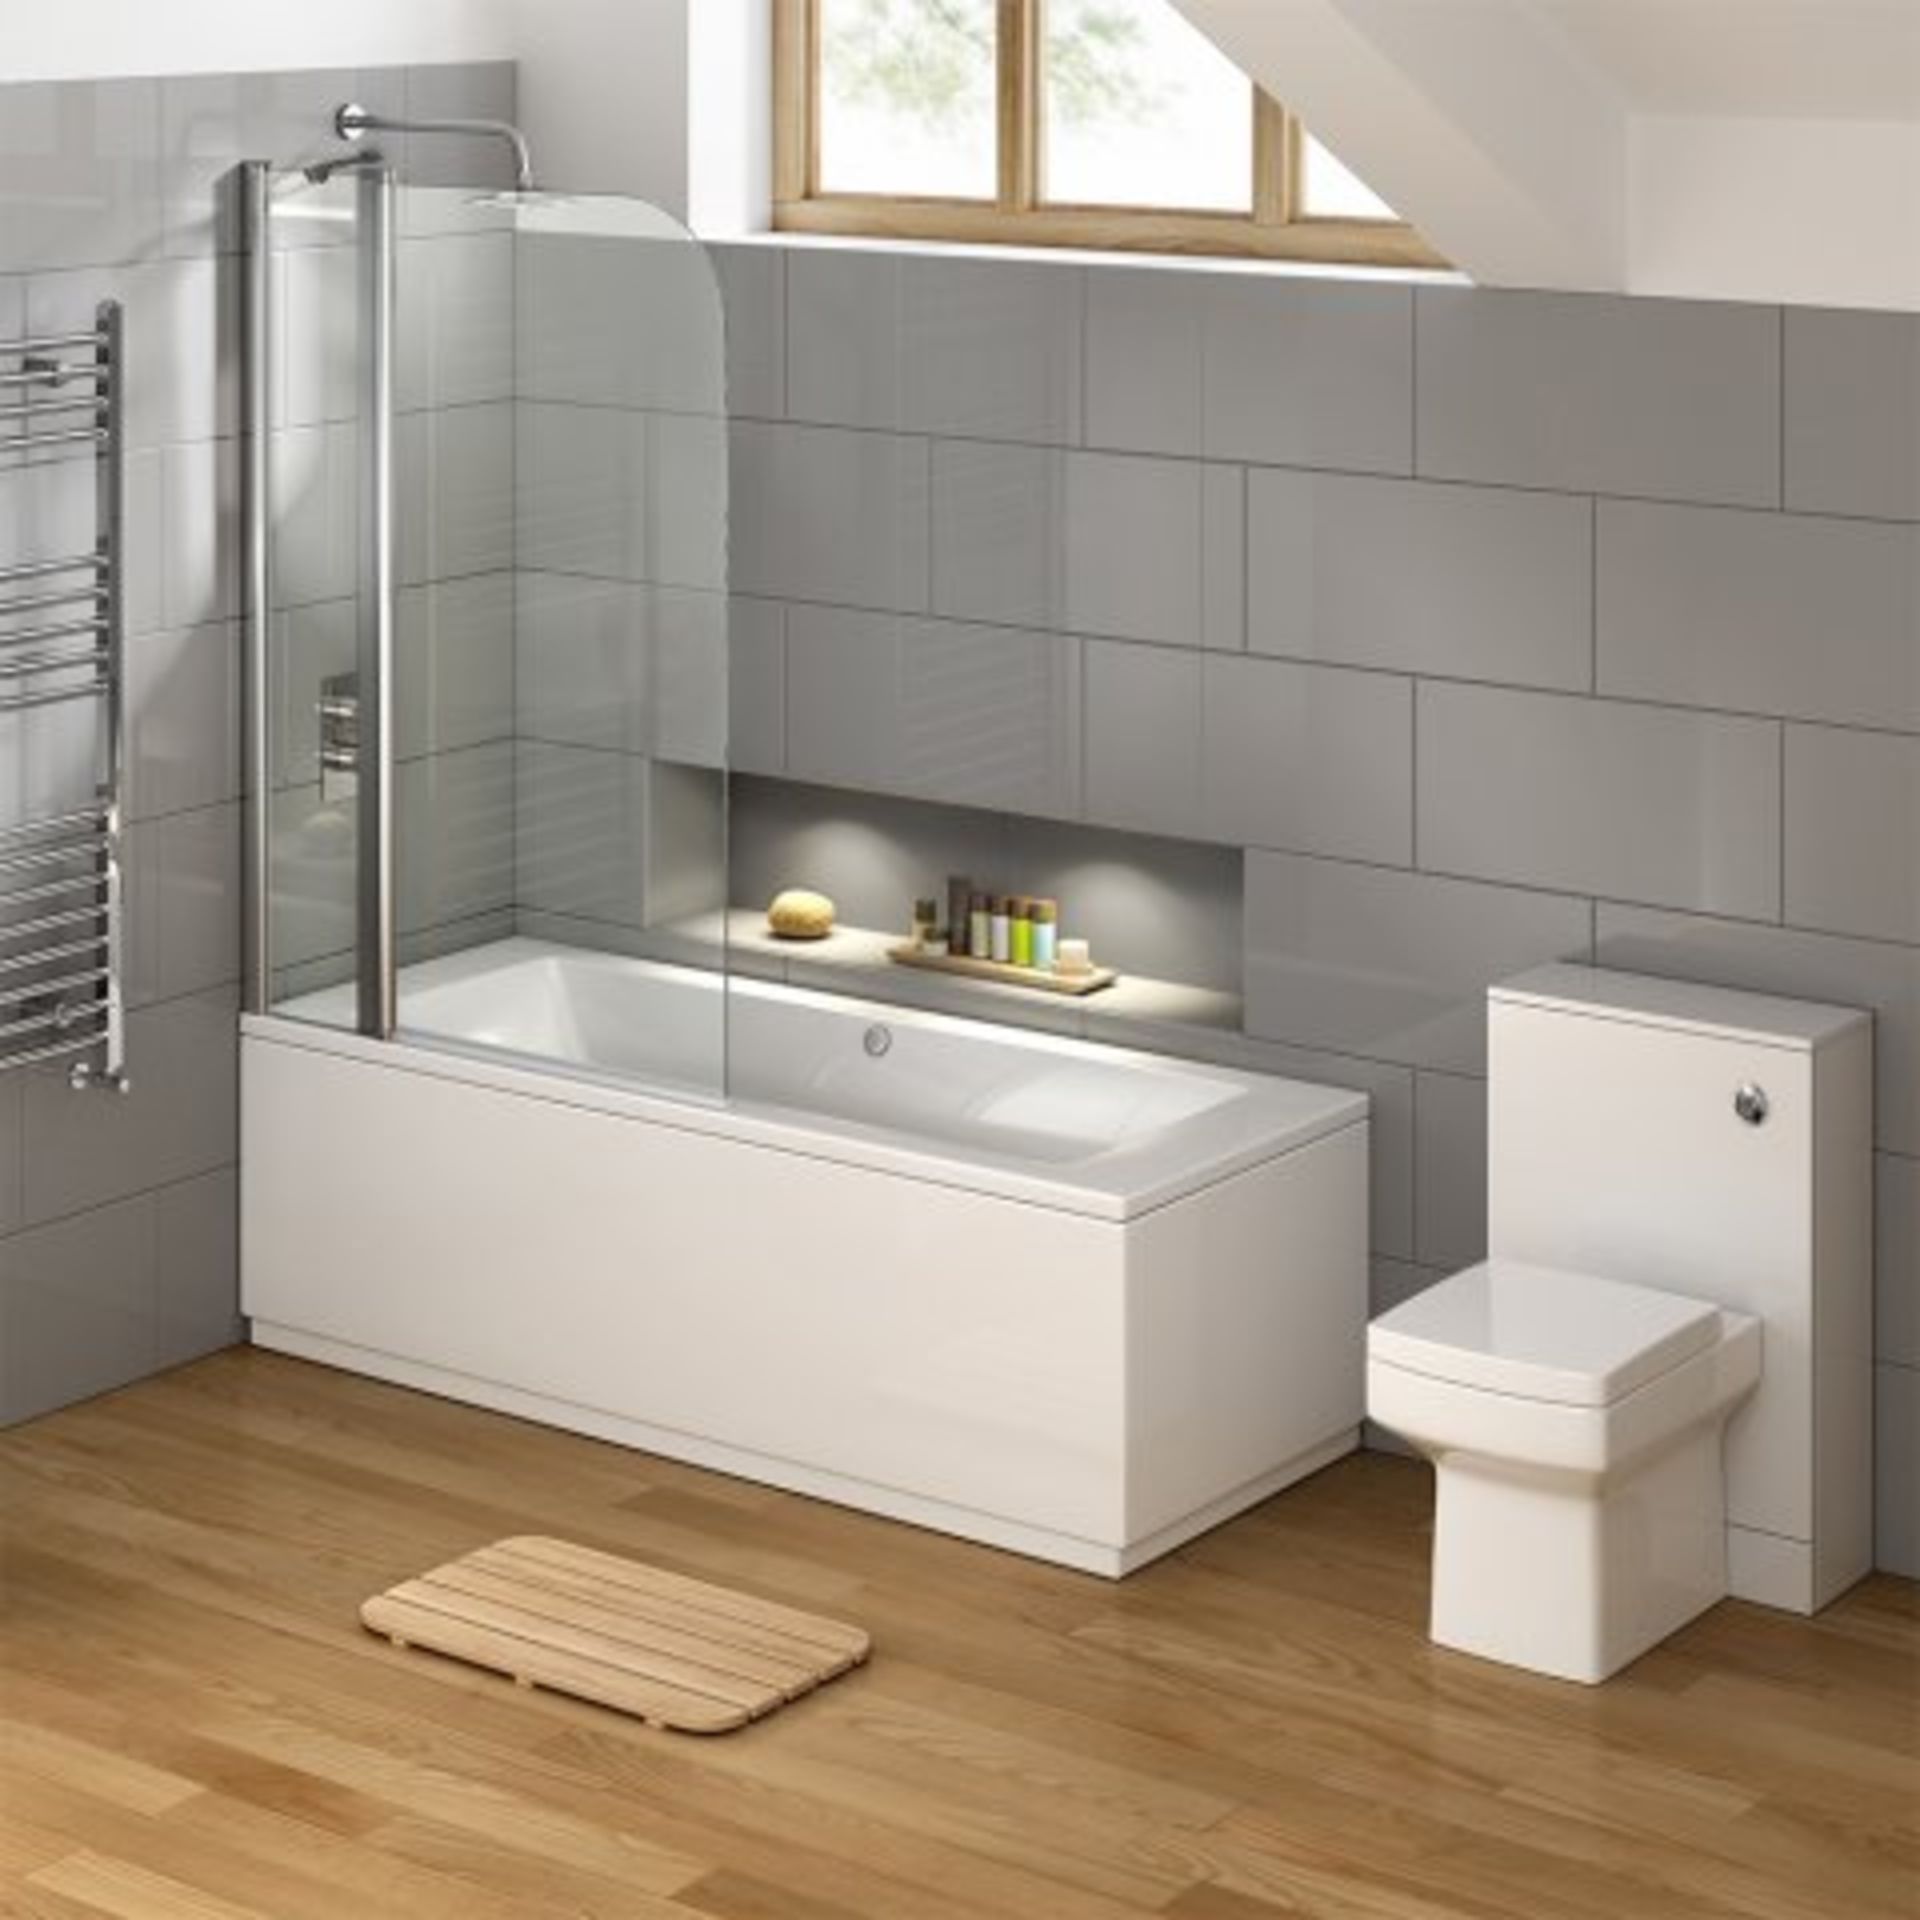 (Z66) 1000mm - 6mm - EasyClean Straight Bath Screen. RRP £224.99. The clue is in the name: Easy - Image 3 of 5